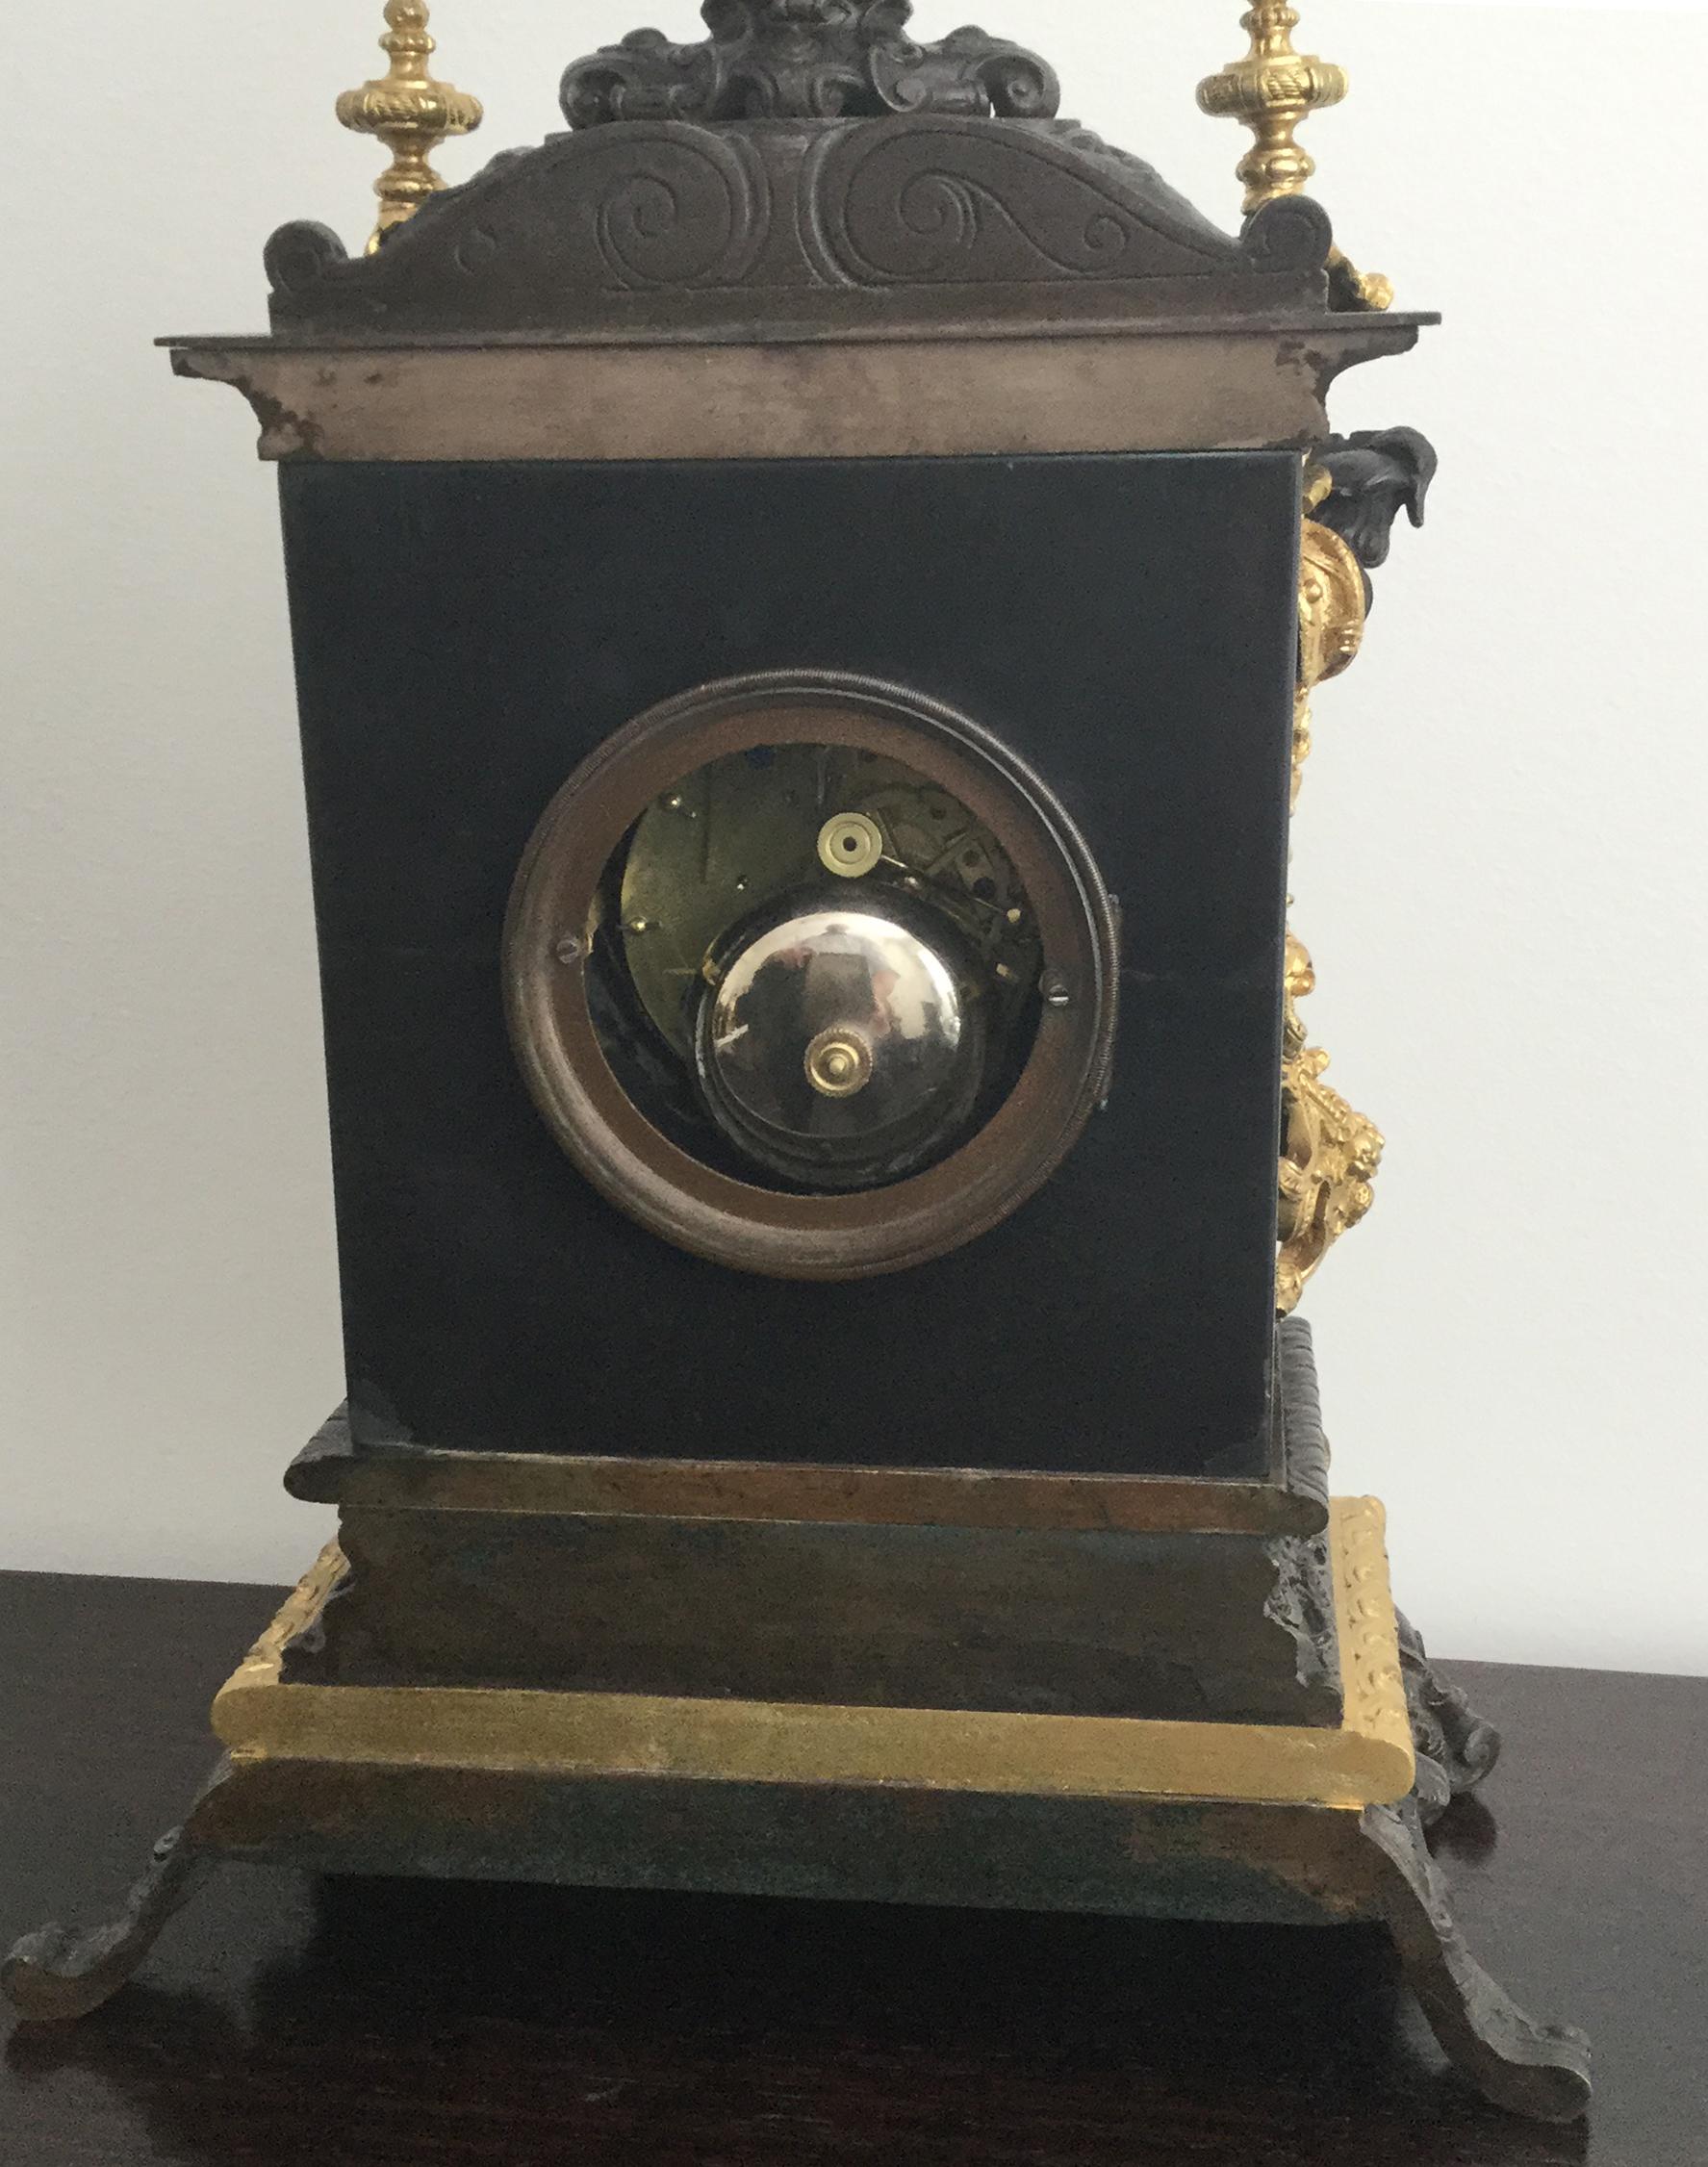 Baroque Style Mantel Clock, Bronze and Black Slate, Bordeaux Maker, 19th Century In Good Condition For Sale In Melbourne, Victoria